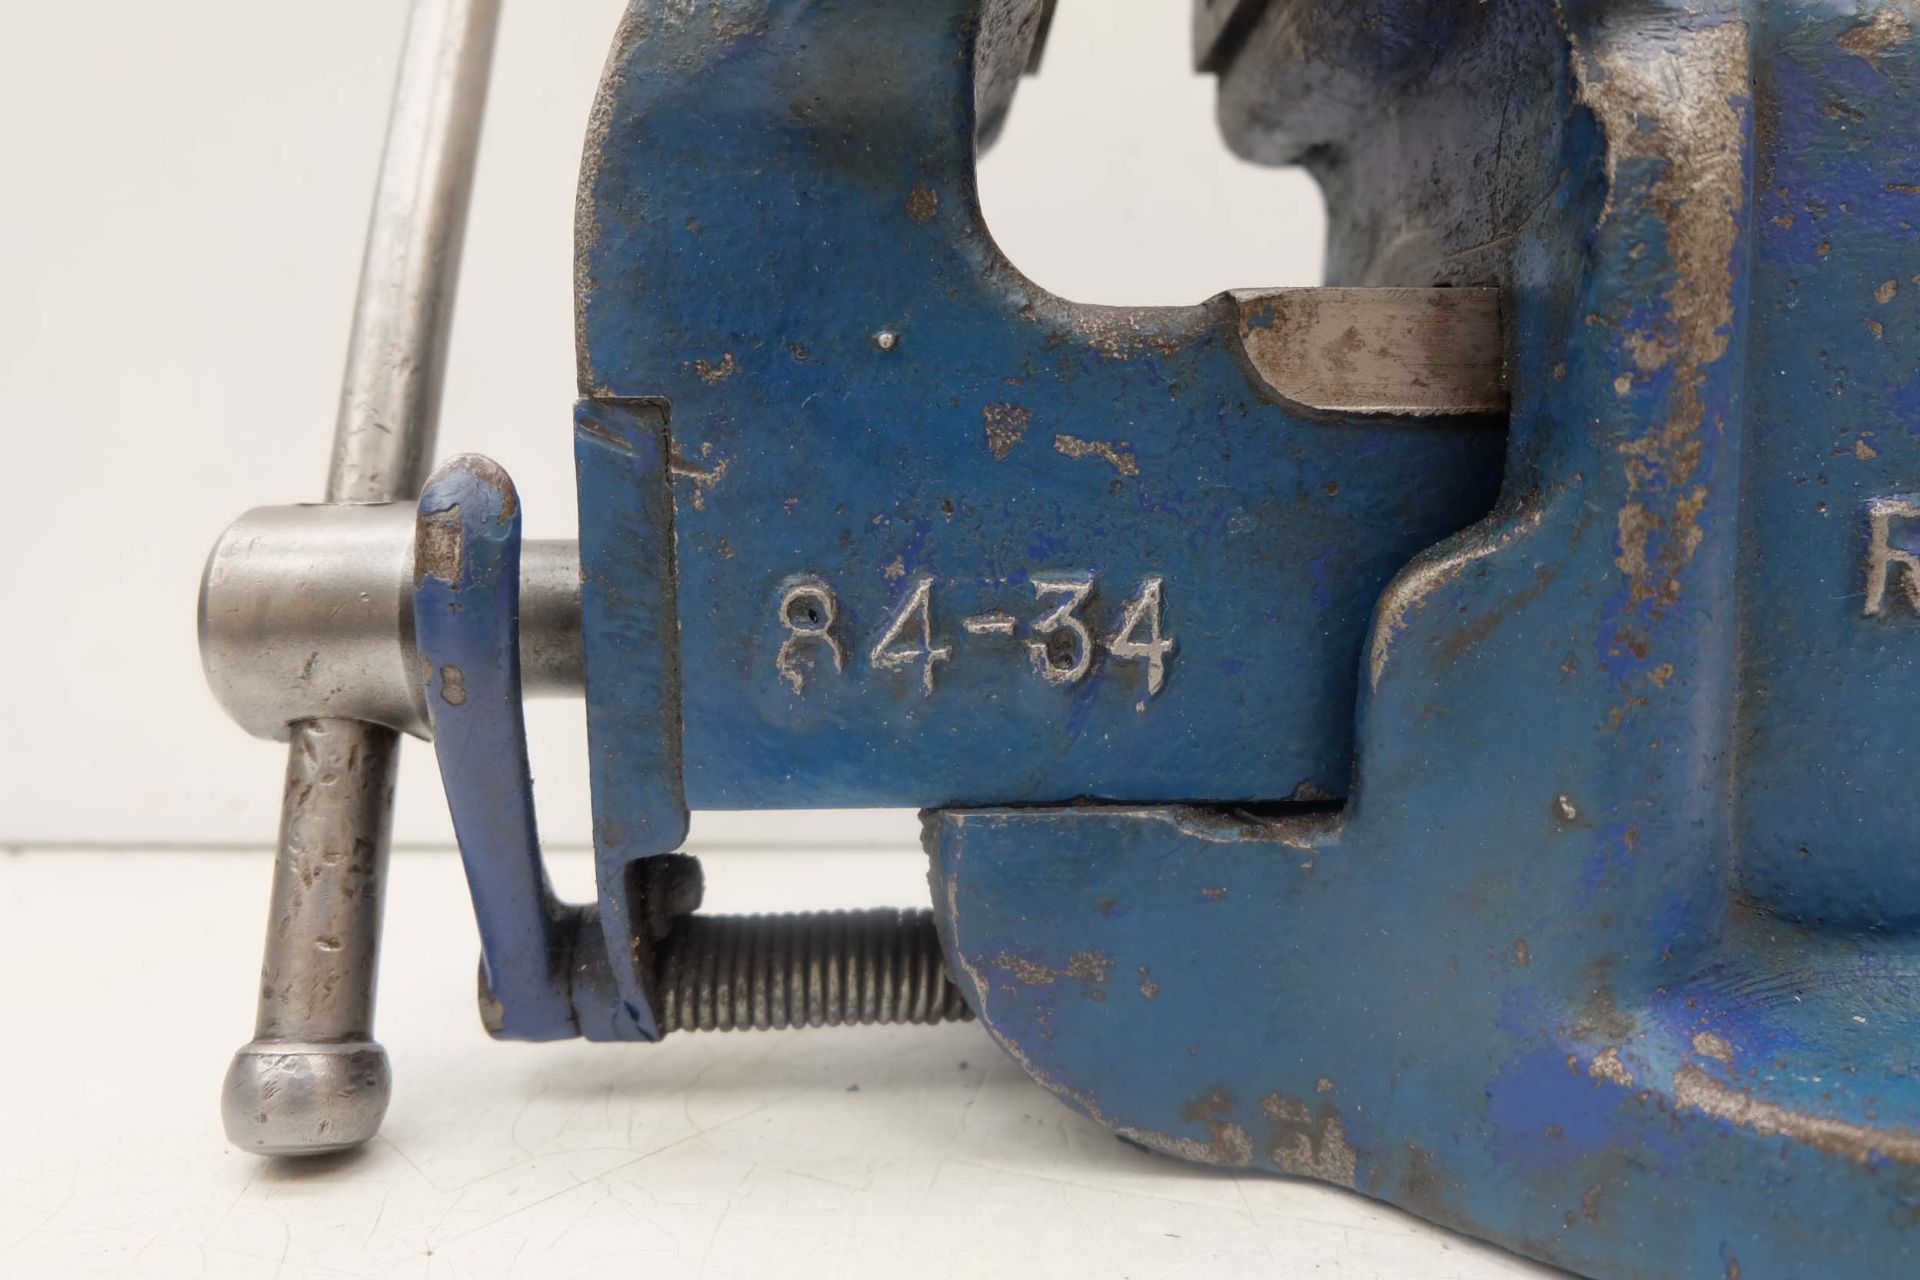 Record 84 - 34 Engineers Bench Vice. Width of Jaws 4 1/2". Maximum Opening 6". With Quick Release. - Image 3 of 6